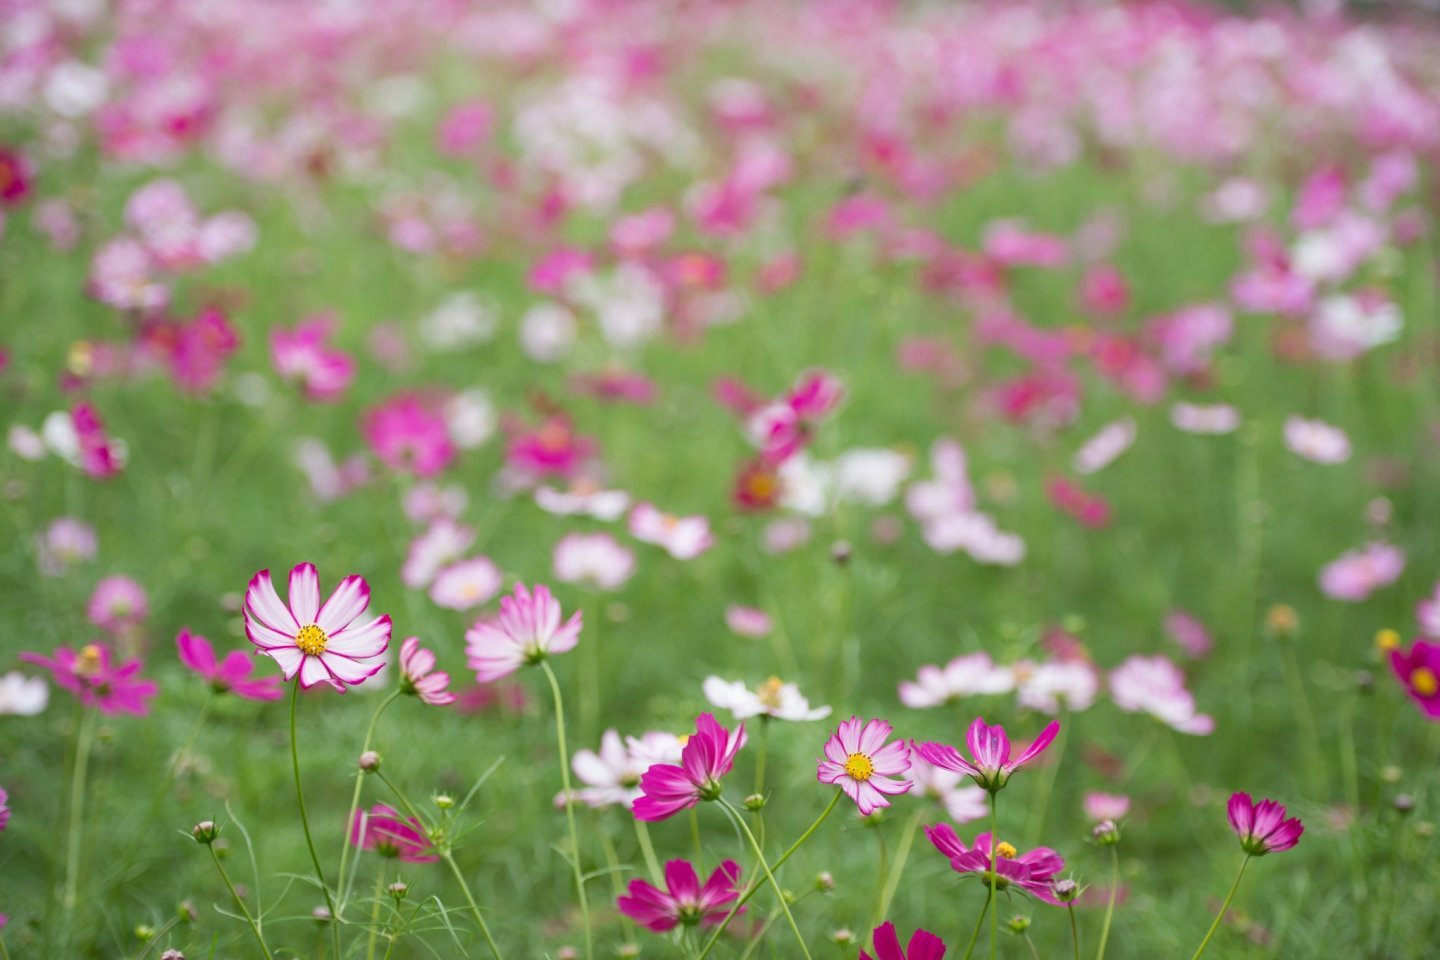 Cosmos - the cherry blossoms of autumn